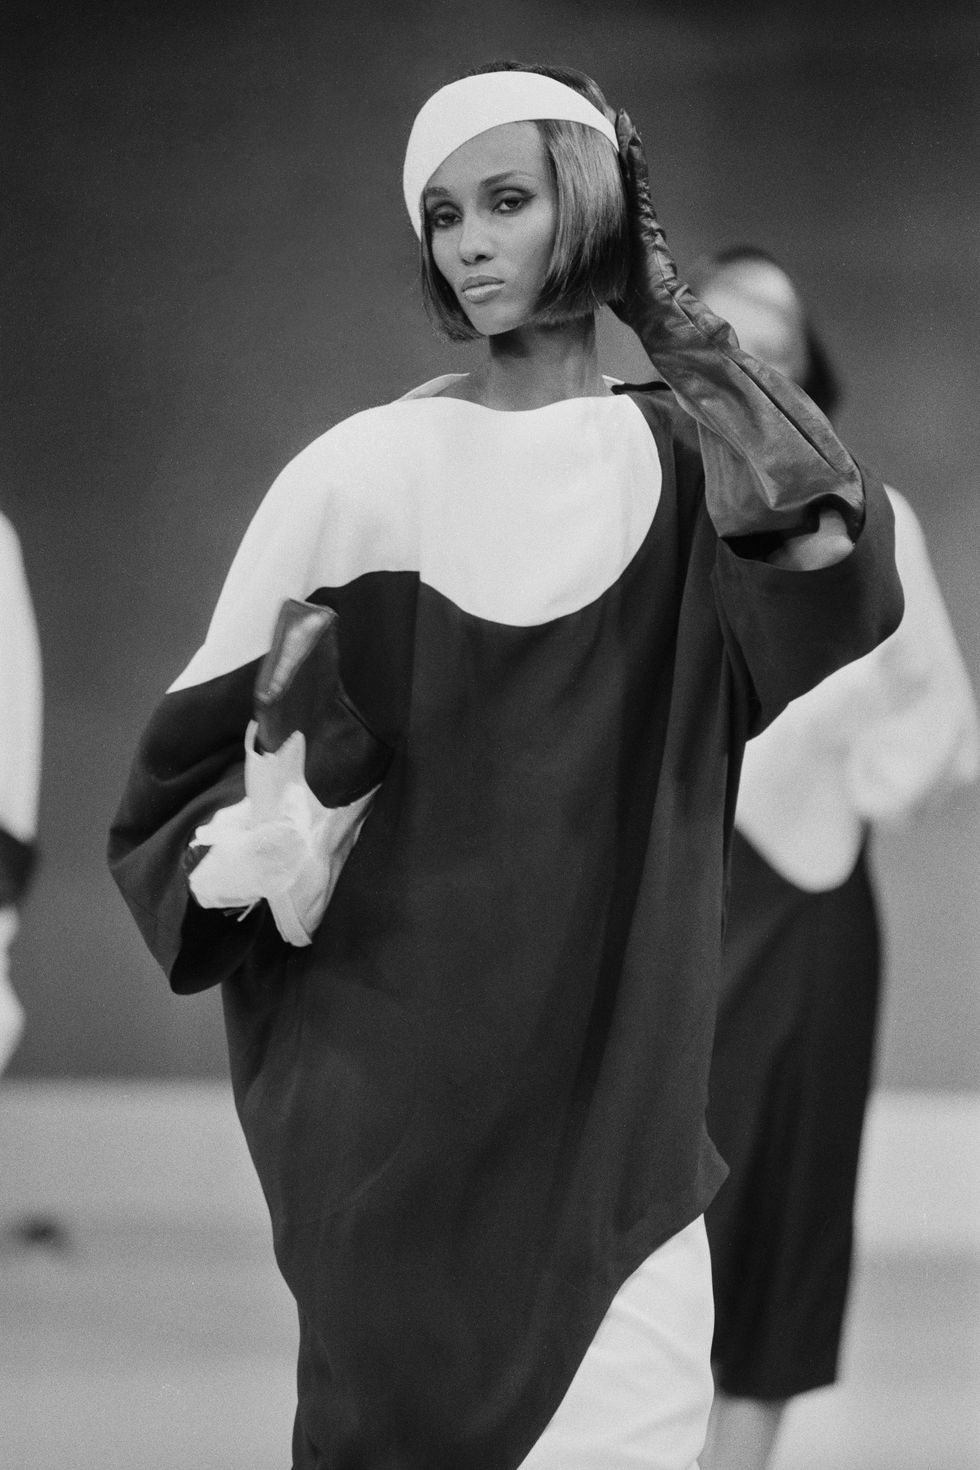 iman on the thierry mugler catwalk in 1983